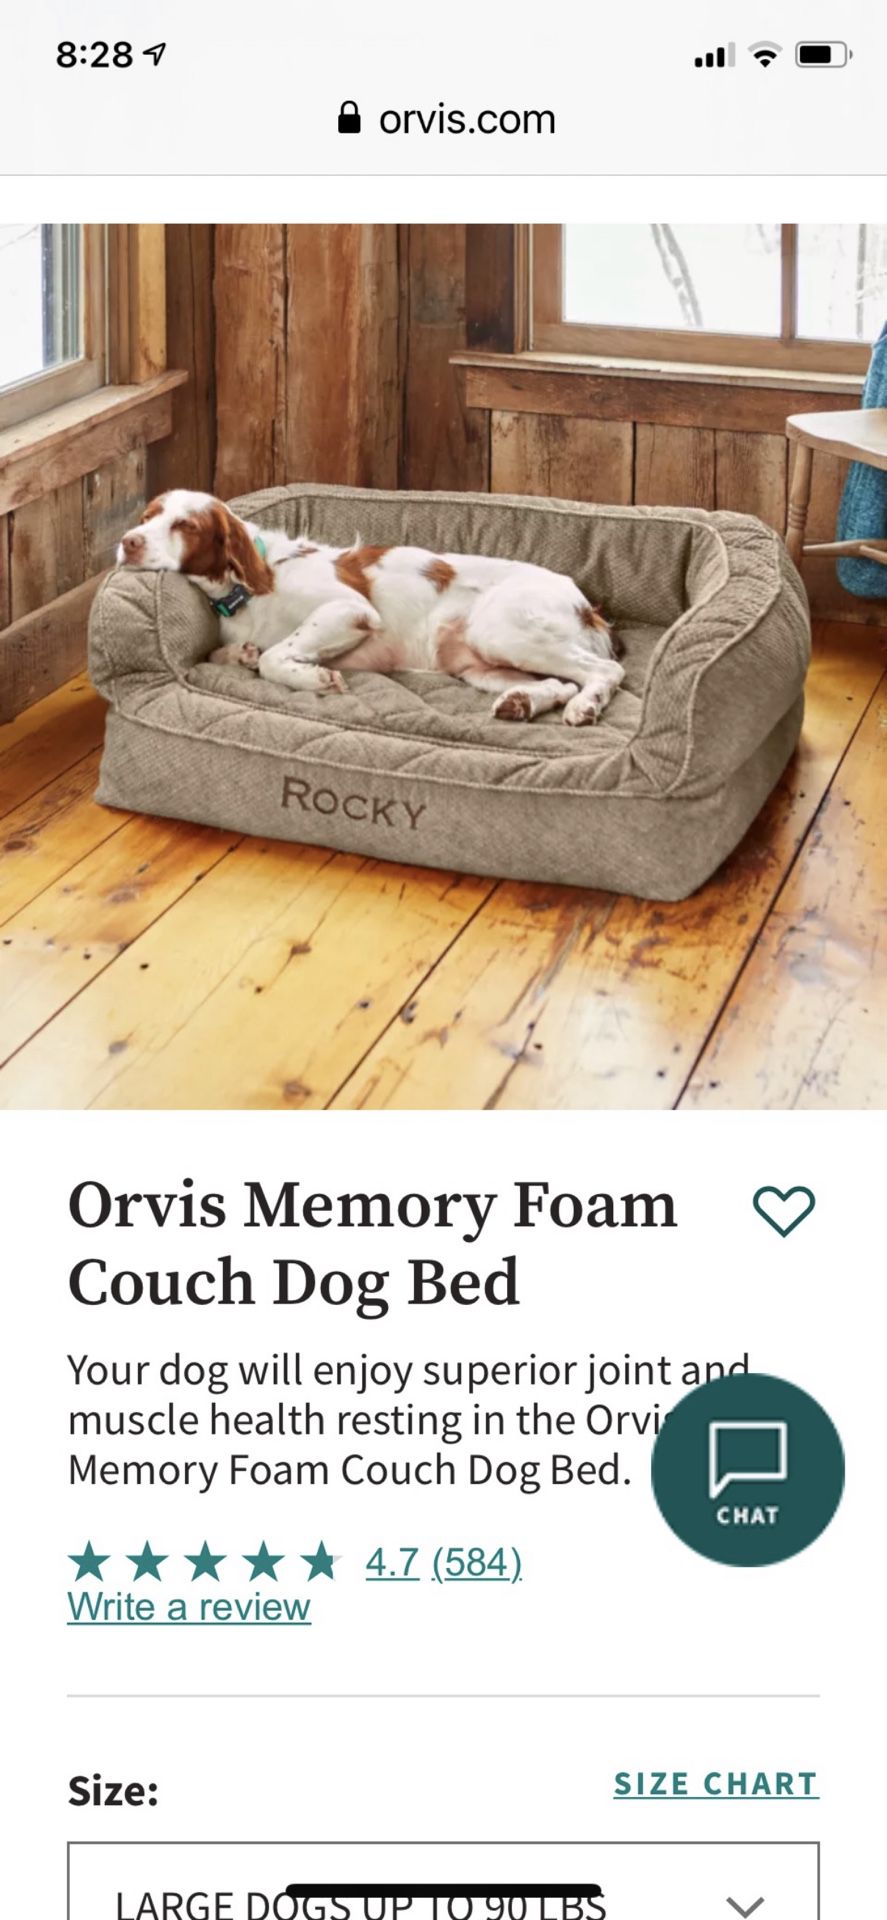 Oris Memory Foam Couch Dog Bed